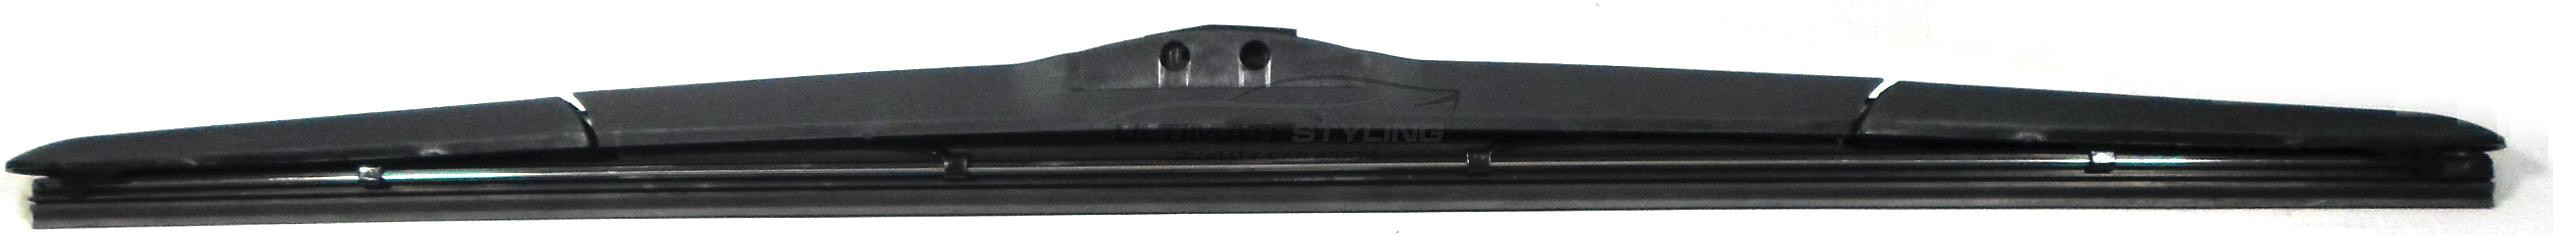 Drivers Side (Front) Wiper Blade for Suzuki Swace